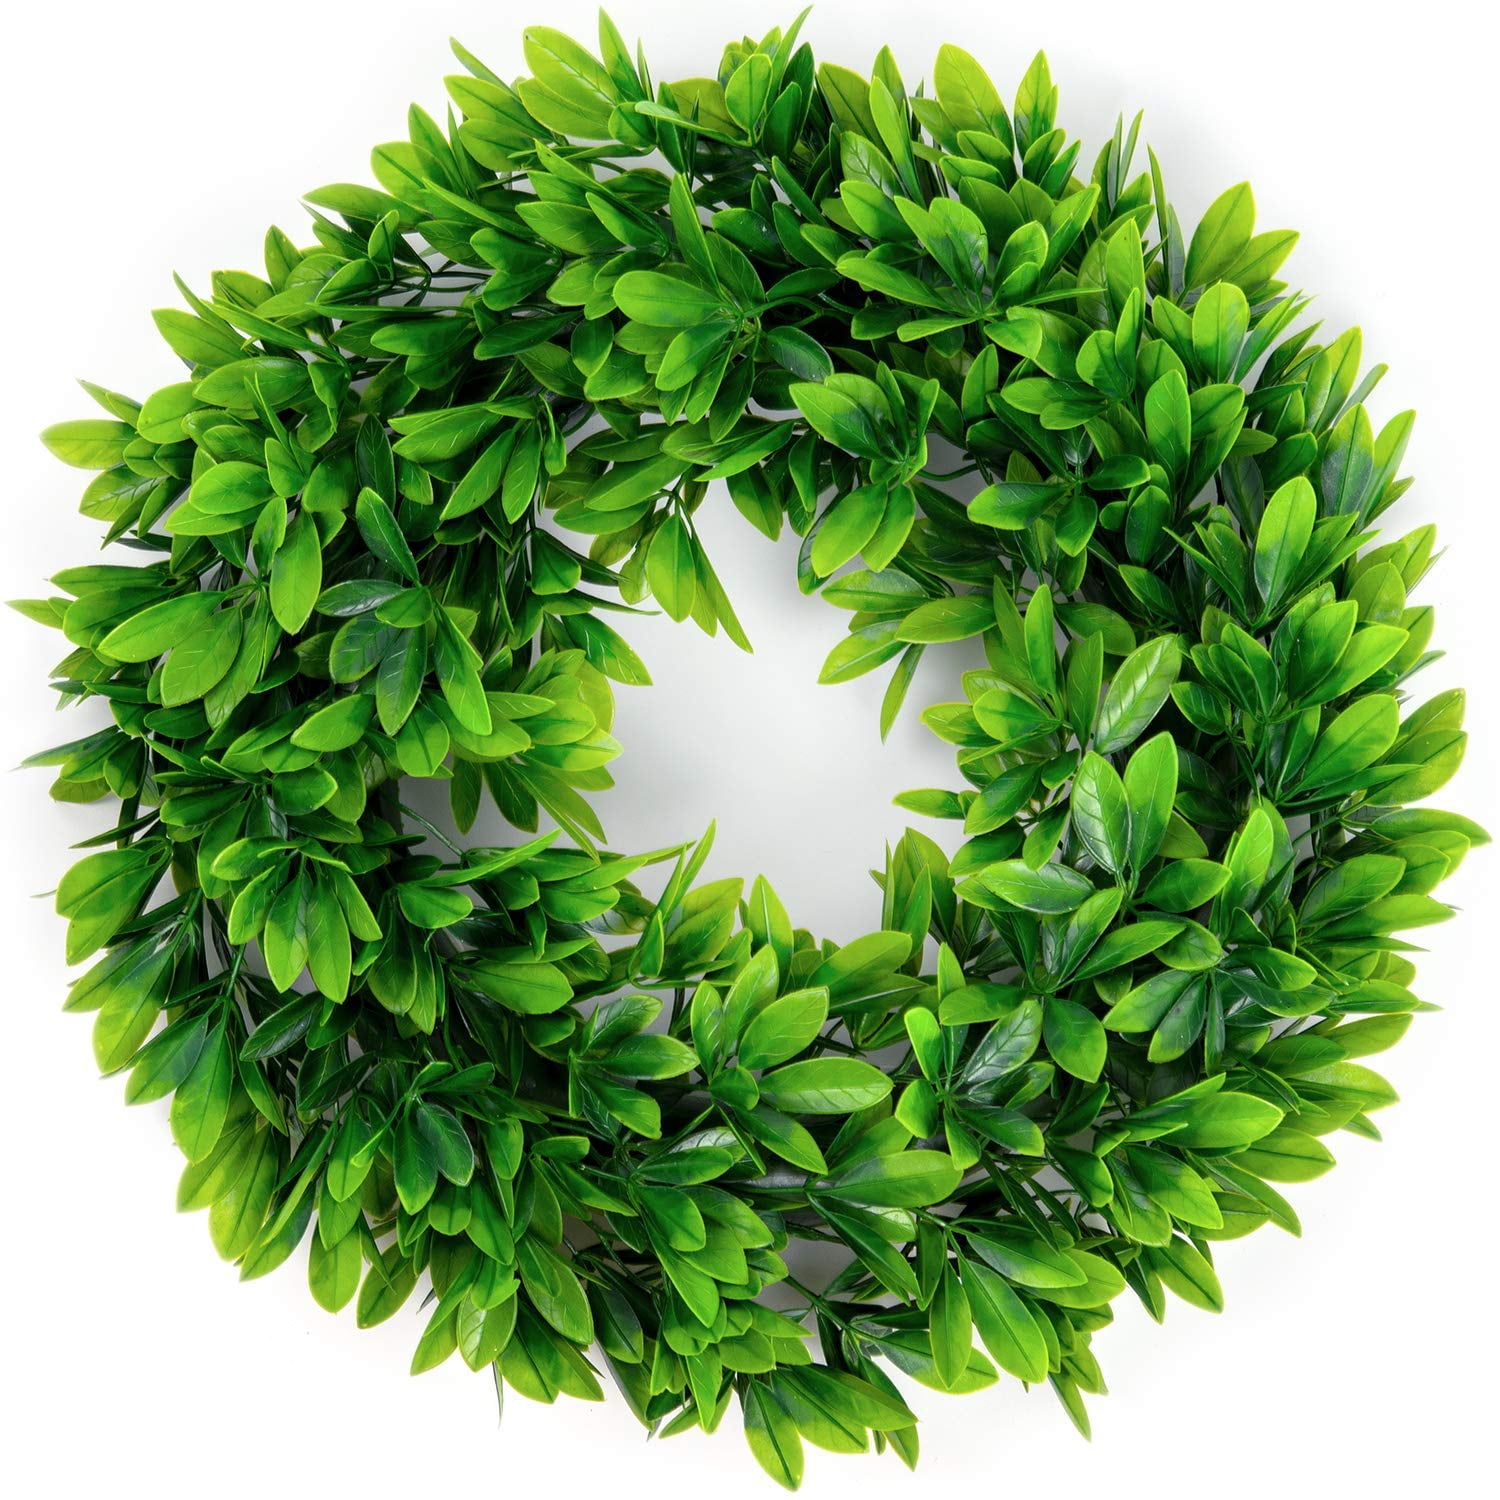 Artificial Green Leaf Wreath 14'' Boxwood Round Wreath Front Door Home Decor 